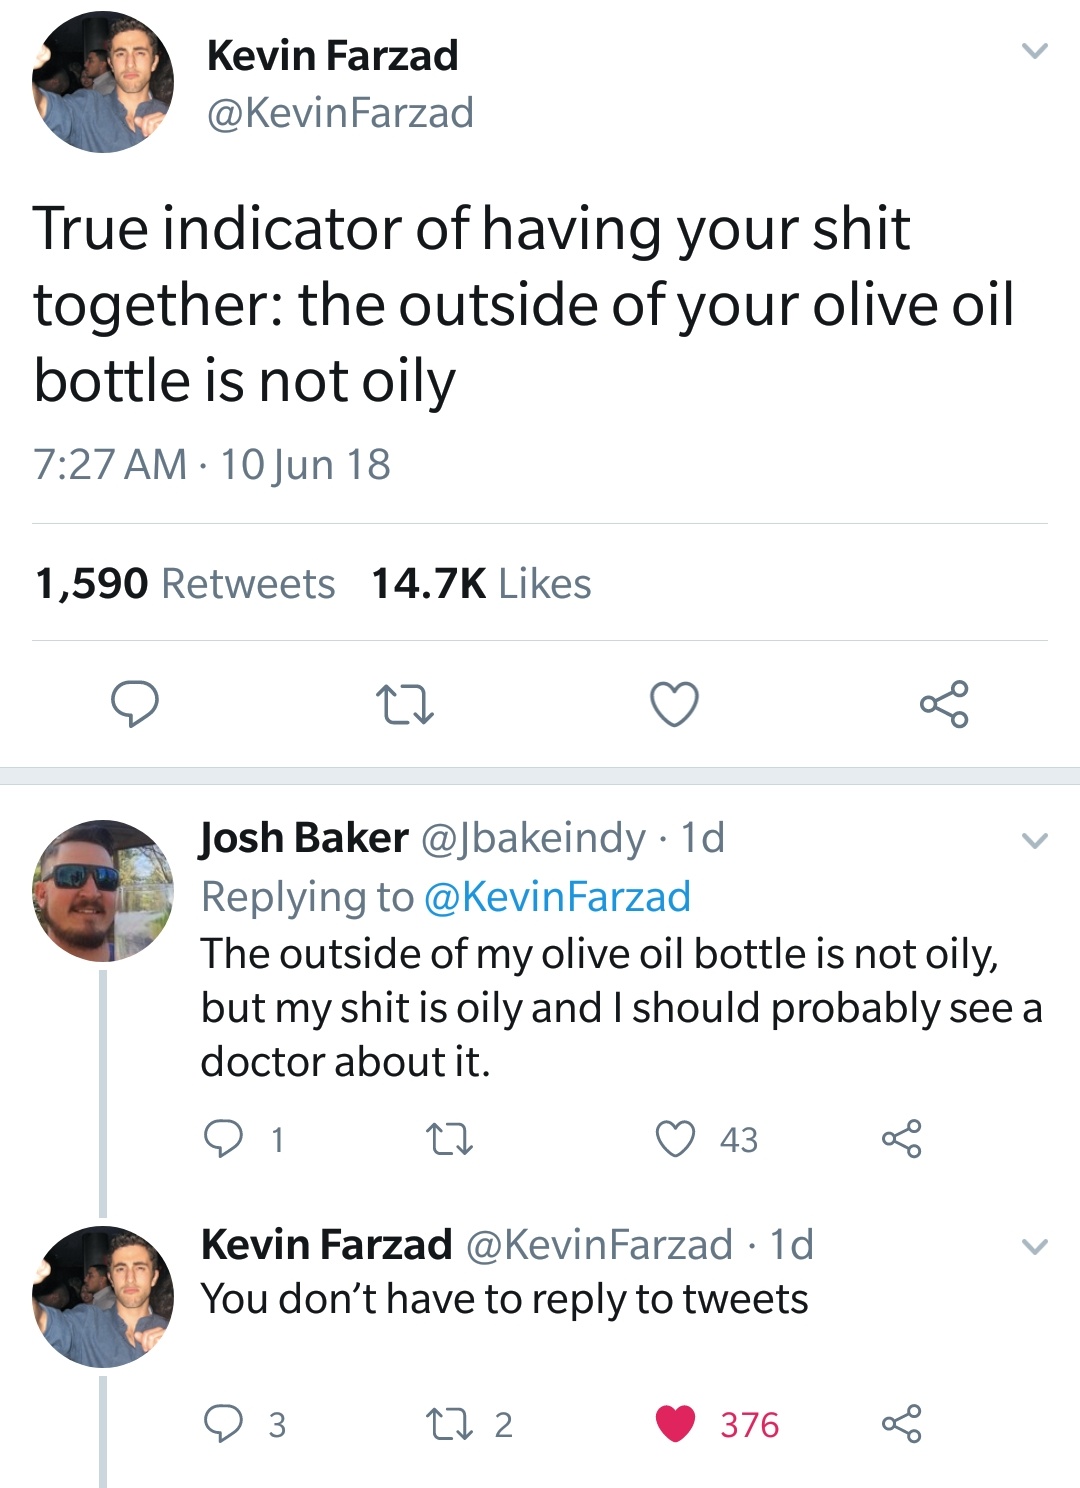 Kevin Farzad True indicator of having your shit together the outside of your olive oil bottle is not oily 10 Jun 18 1,590 Cz Josh Baker 1d Farzad The outside of my olive oil bottle is not oily, but my shit is oily and I should probably see a doctor about…